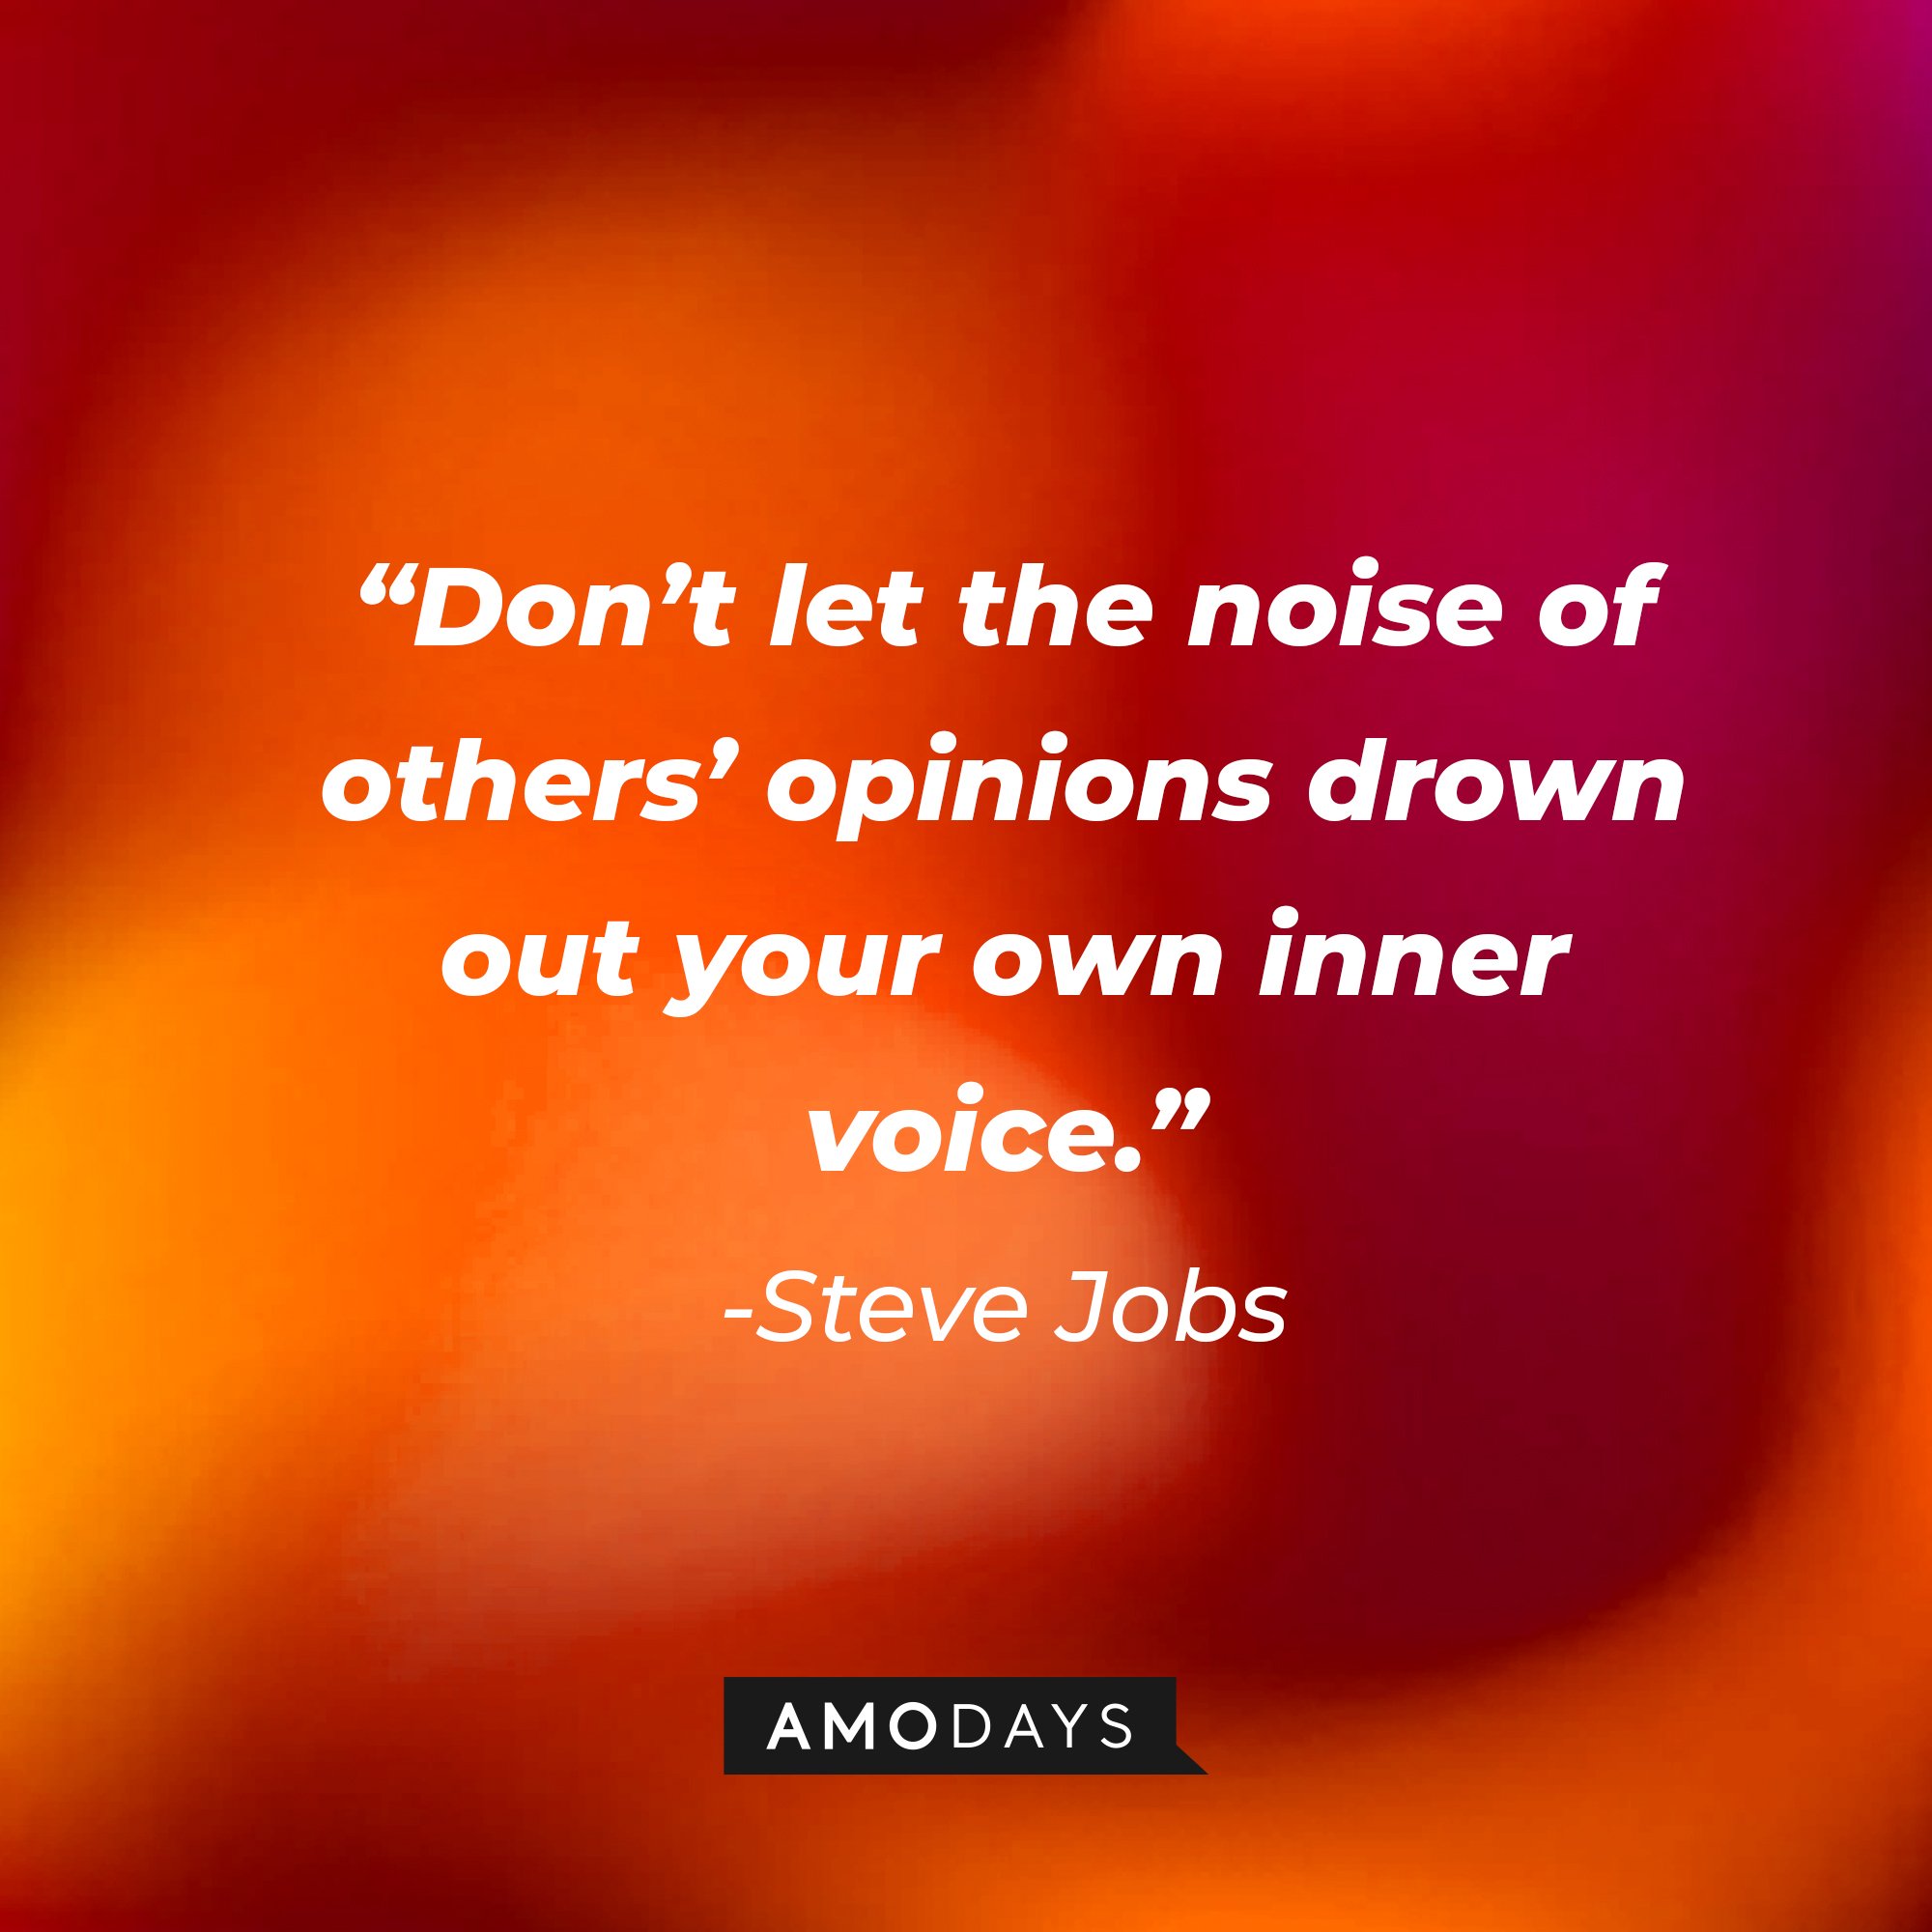 Steve Jobs’s quote: “Don't let the noise of others' opinions drown out your own inner voice.” | Image: AmoDays